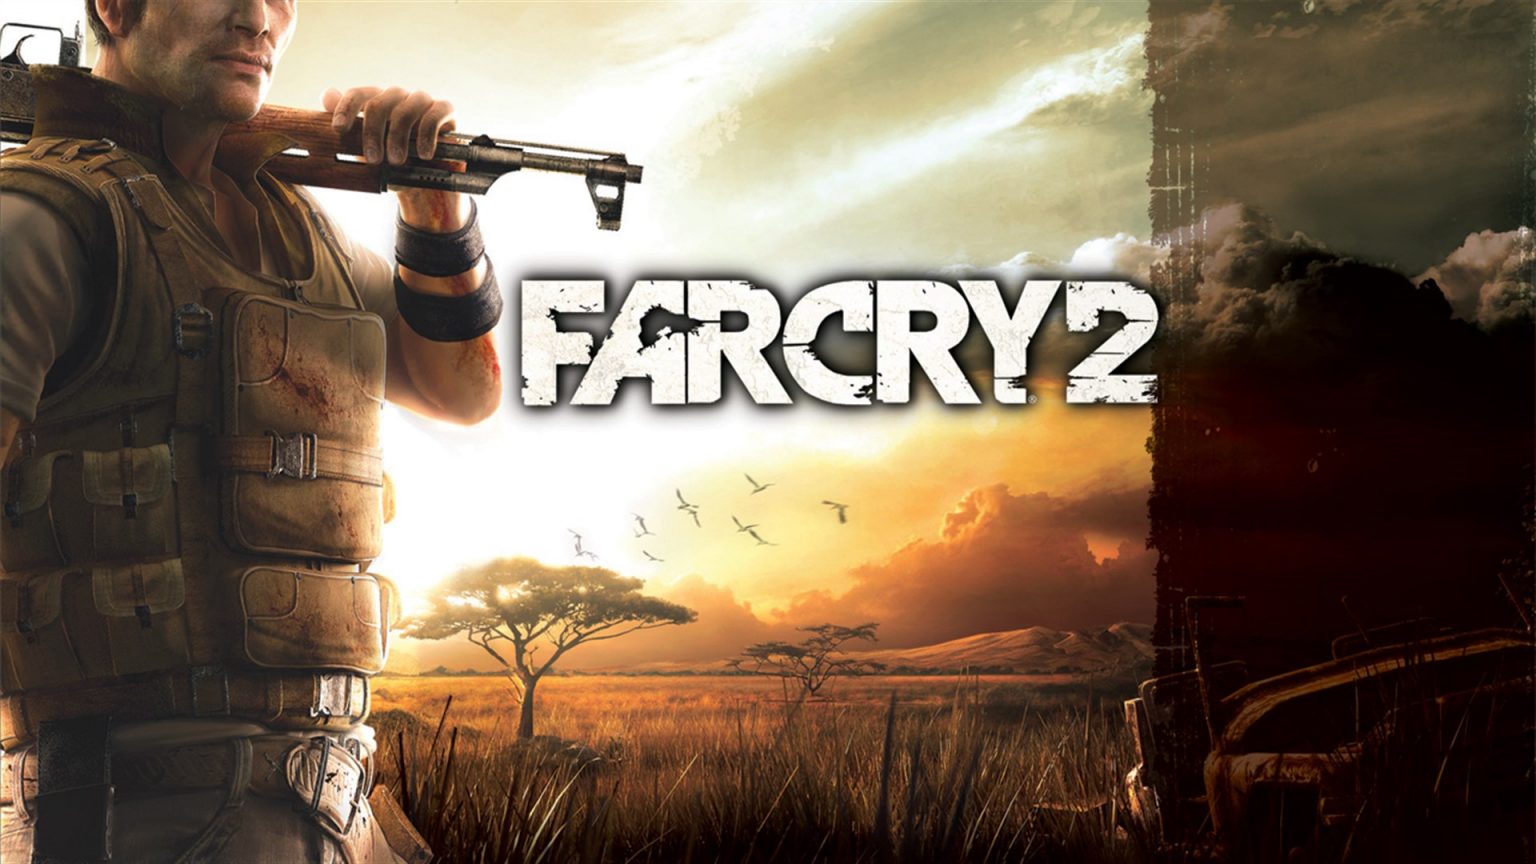 far cry 2 game download torrent pc